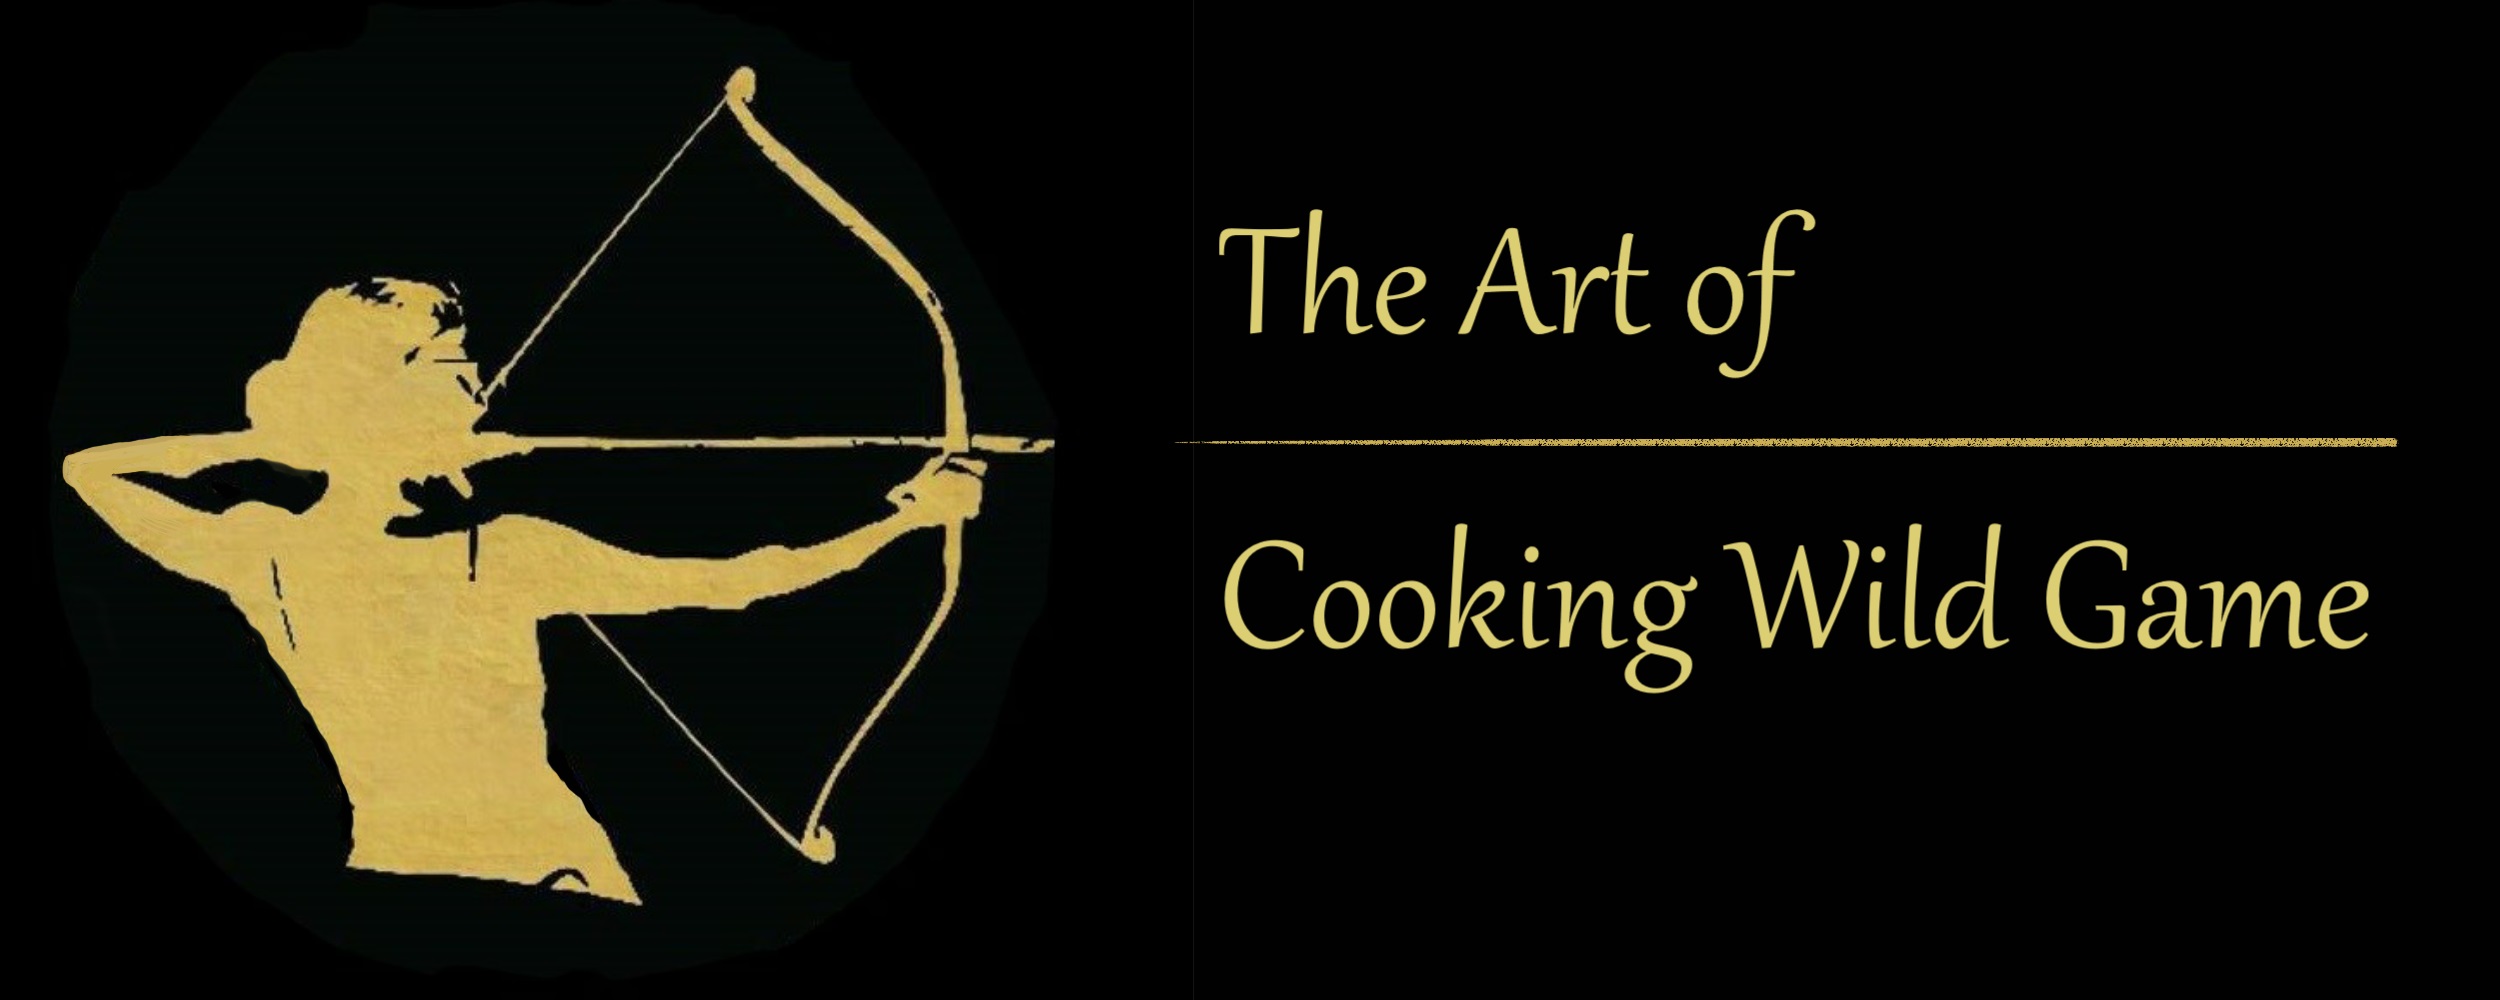 The Art of Cooking Wild Game